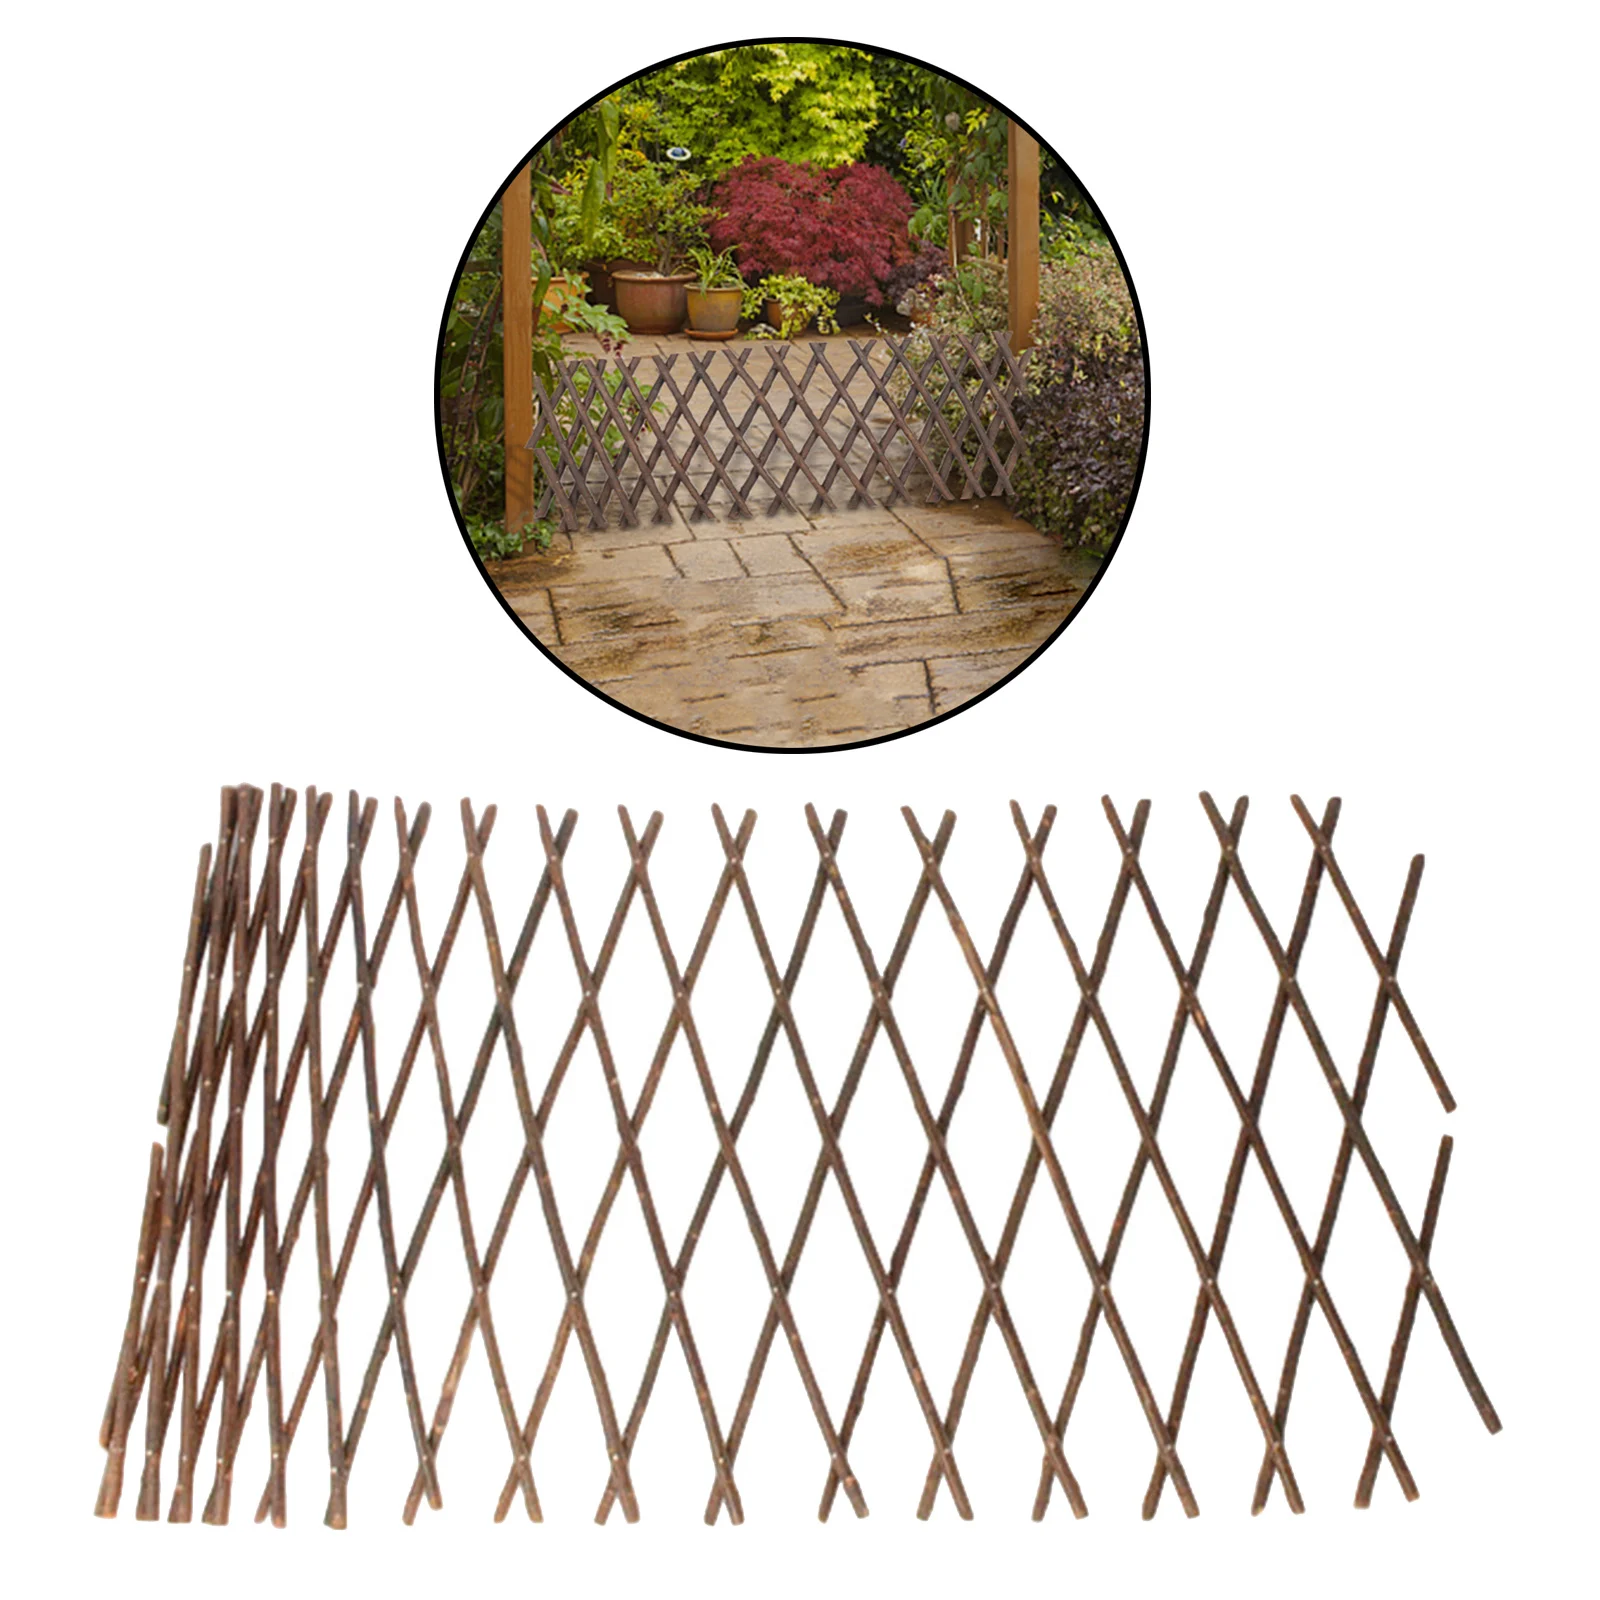 Expandable Garden Fence Wood Vines Ivy Climbing Frame Support Lattice Panel